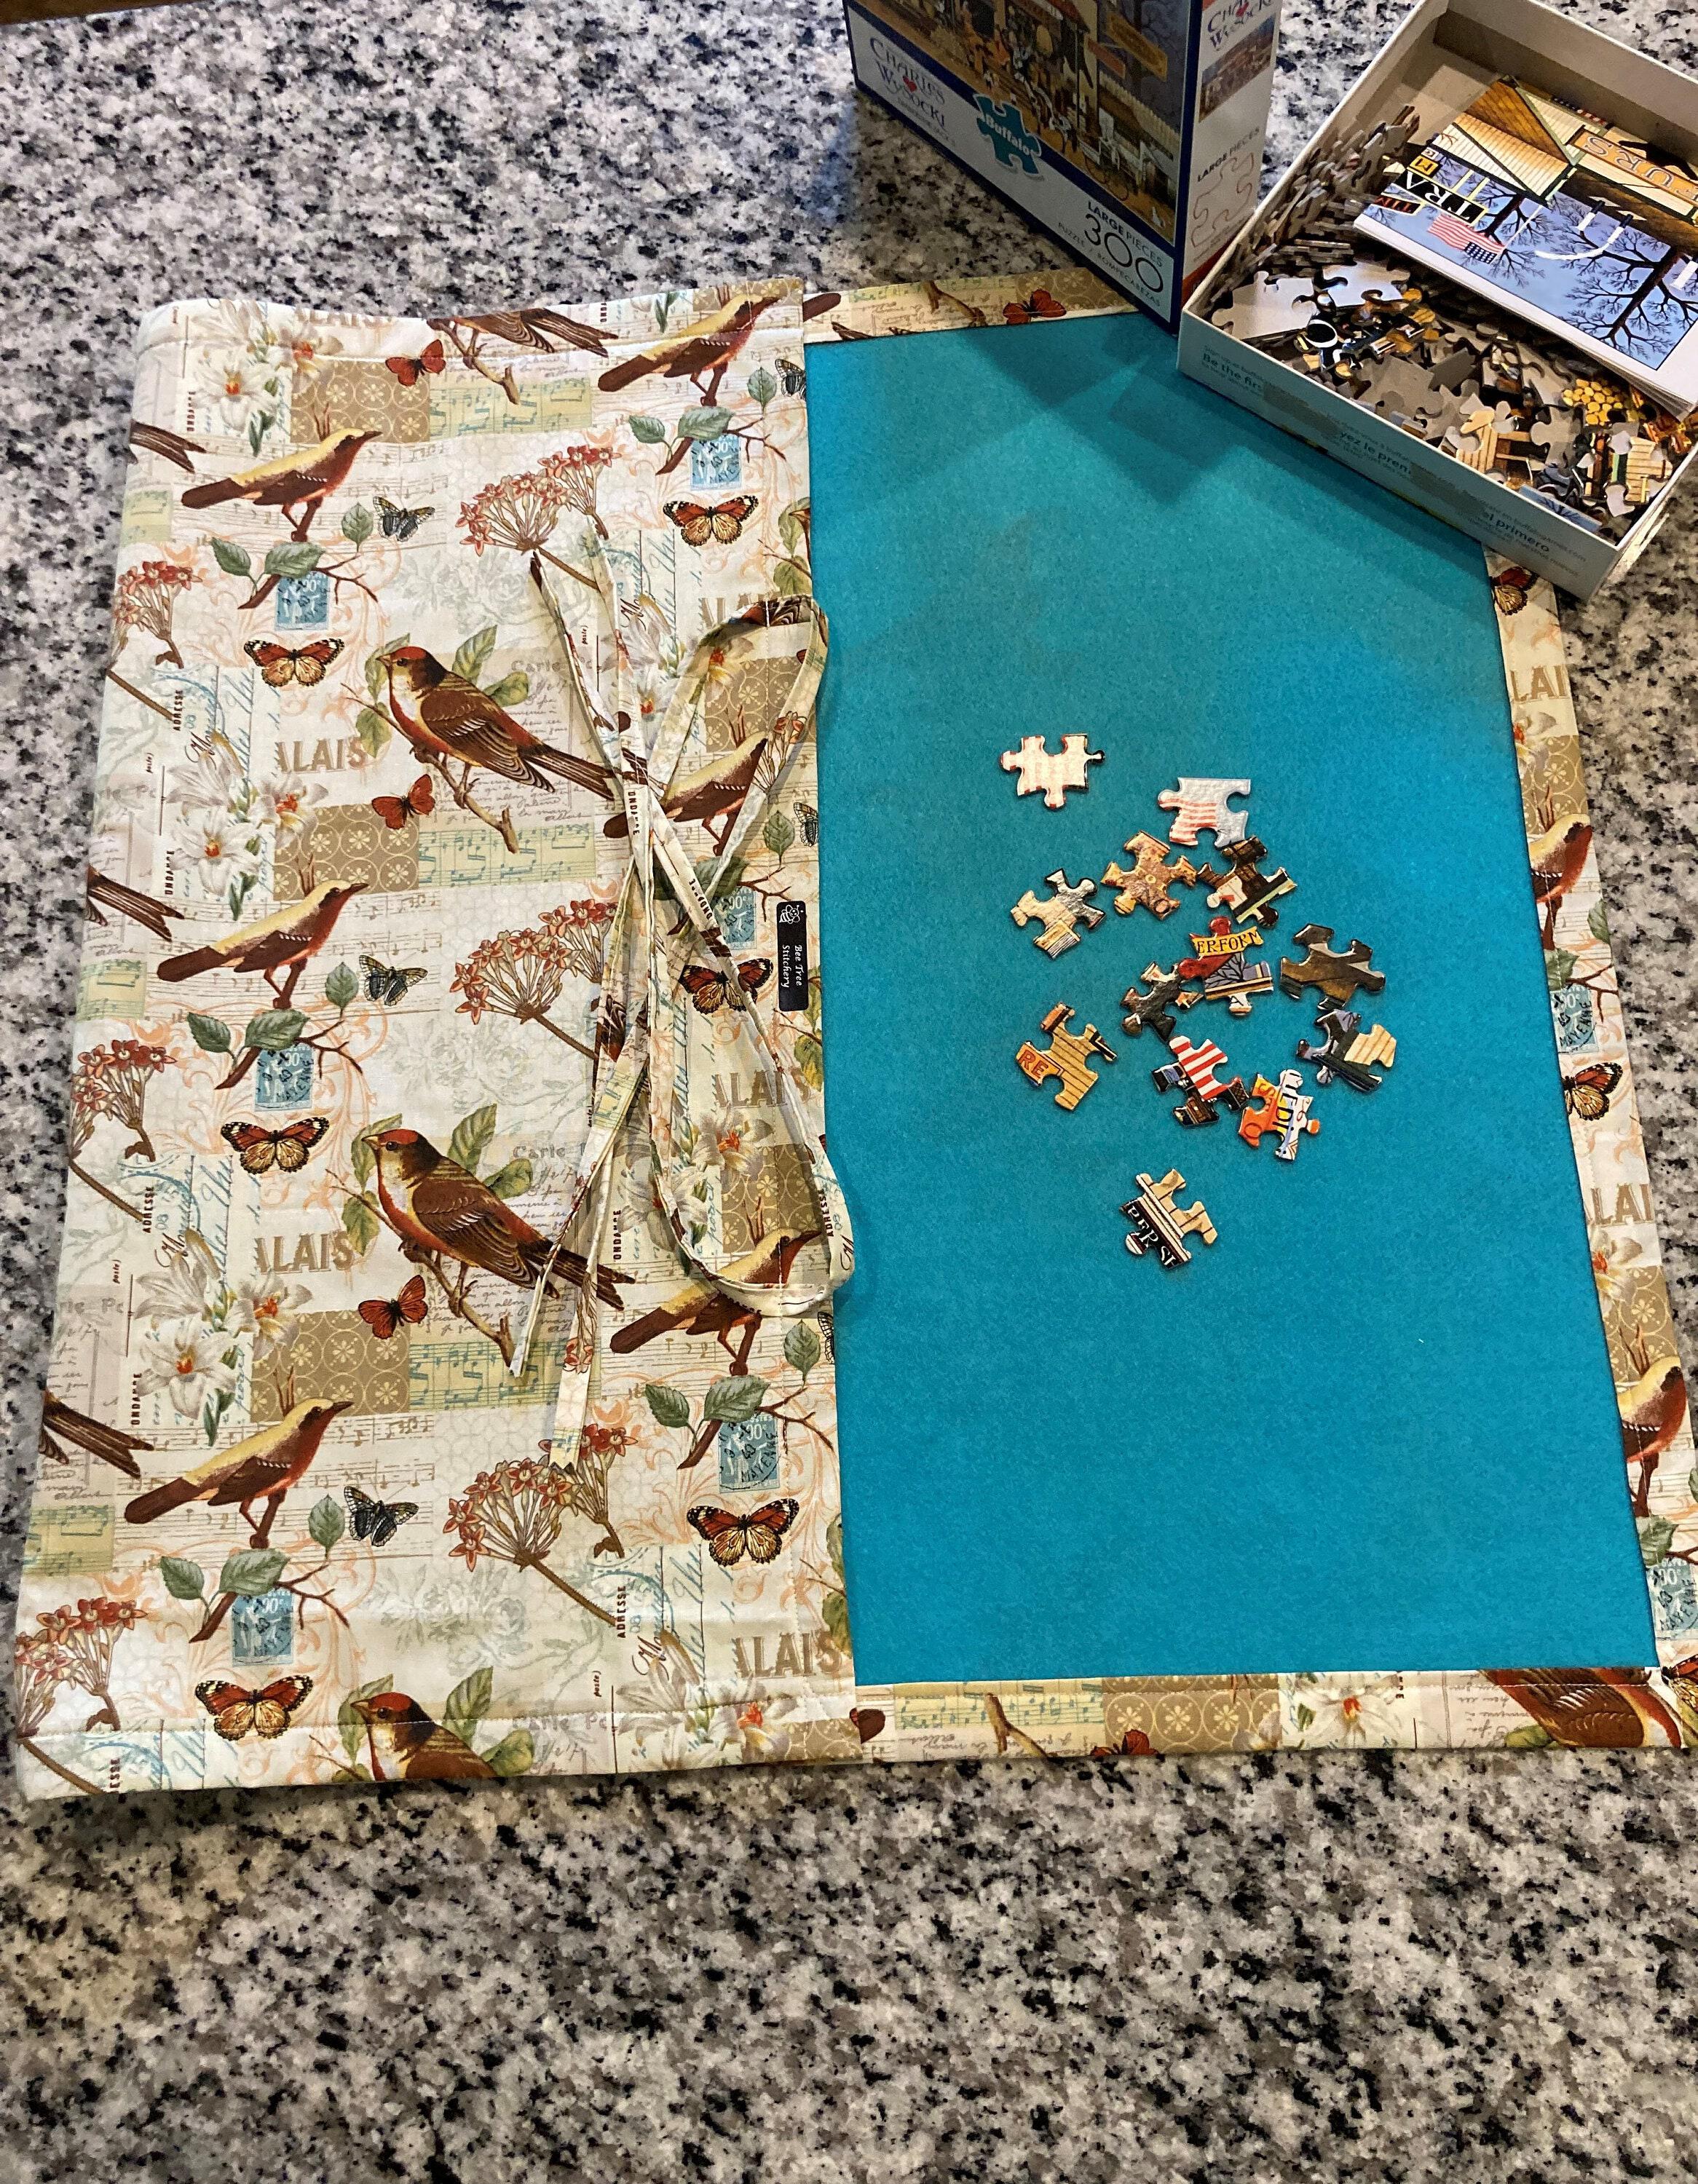 Fun & Games :: Games & Puzzles :: Puzzles :: Adult Puzzles :: Birds,  butterflies, music notes, Jigsaw Puzzle mat, beading mat, cream color felt  (turquoise is sold out), handmade